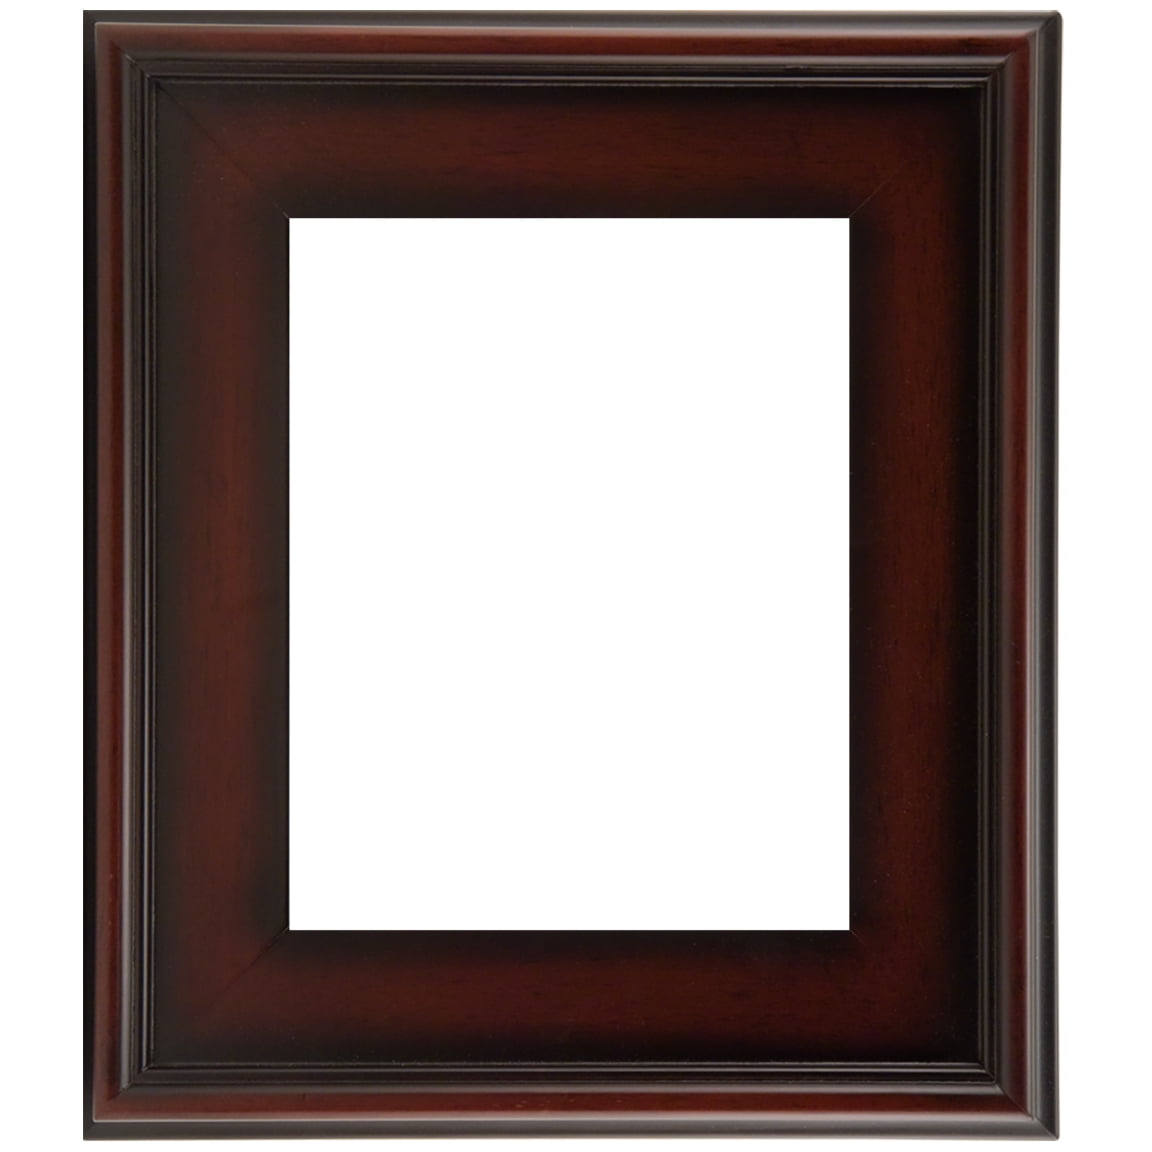 Dark Wood Canvas Picture Frame Two Tone Large 19x22 for 12x16